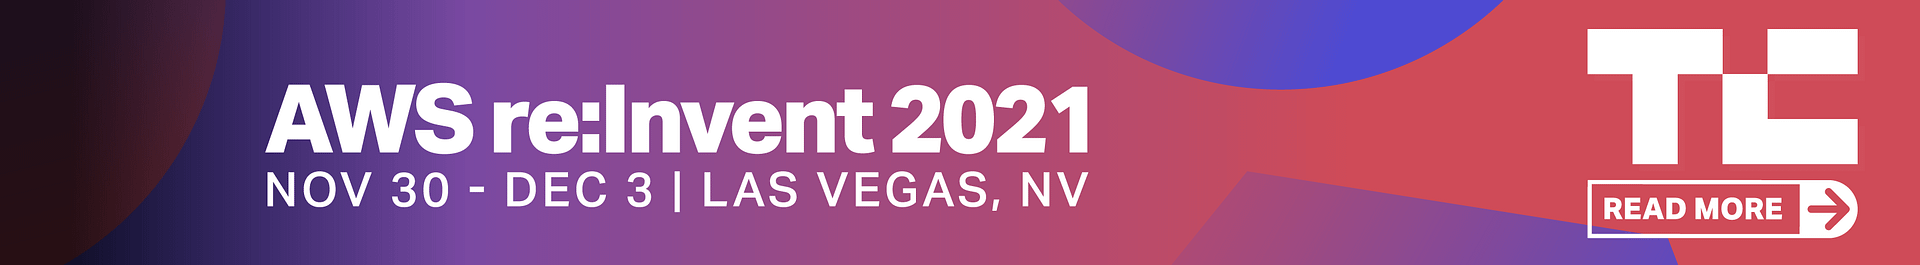 read more about AWS re:Invent 2021 on TechCrunch